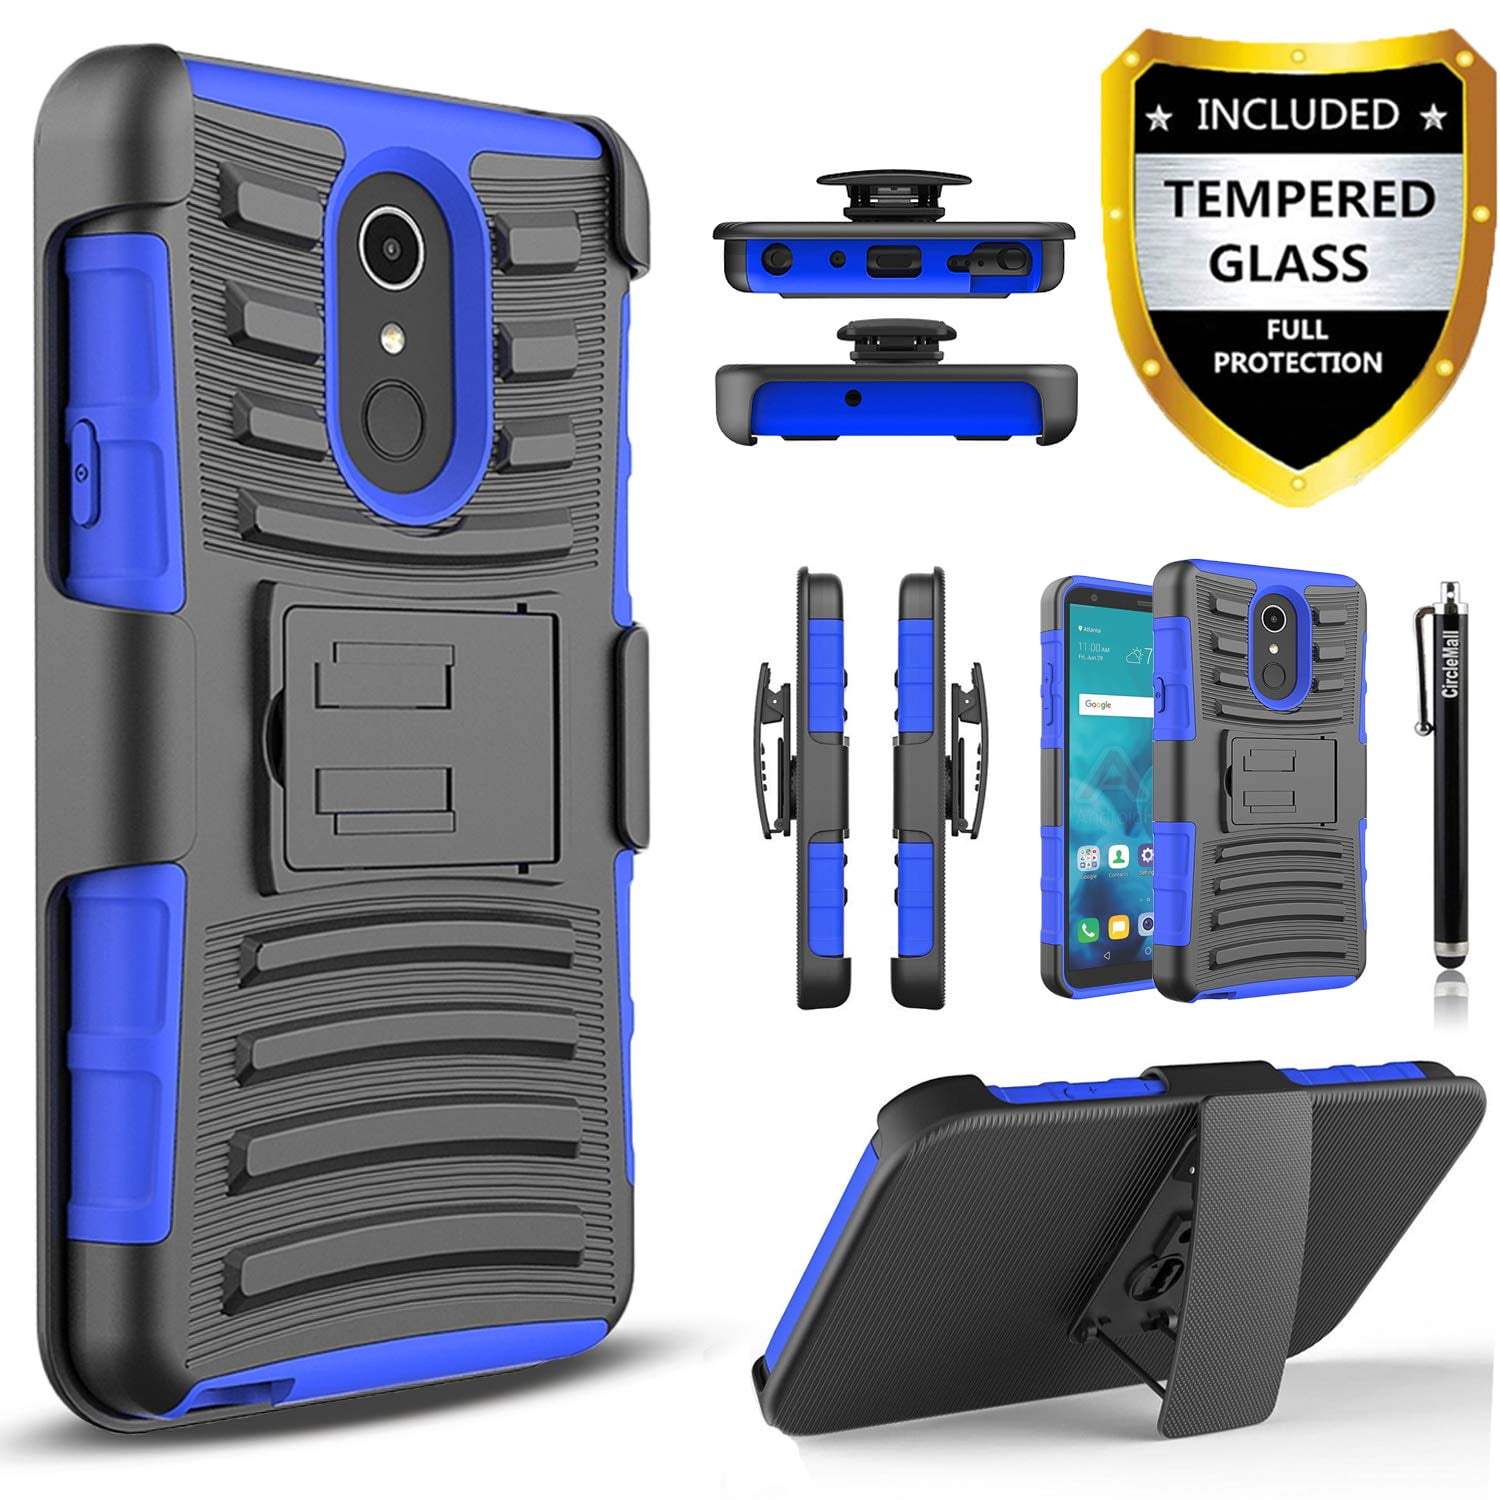 LG Aristo 4 + Plus Case, LG Prime 2/Escape Plus/Arena 2/Tribute Royal/Journey LTE Case, With [Tempered Glass Screen Protector Included] Circlemalls Built-in Kickstand Belt Holster Phone Cover-Blue